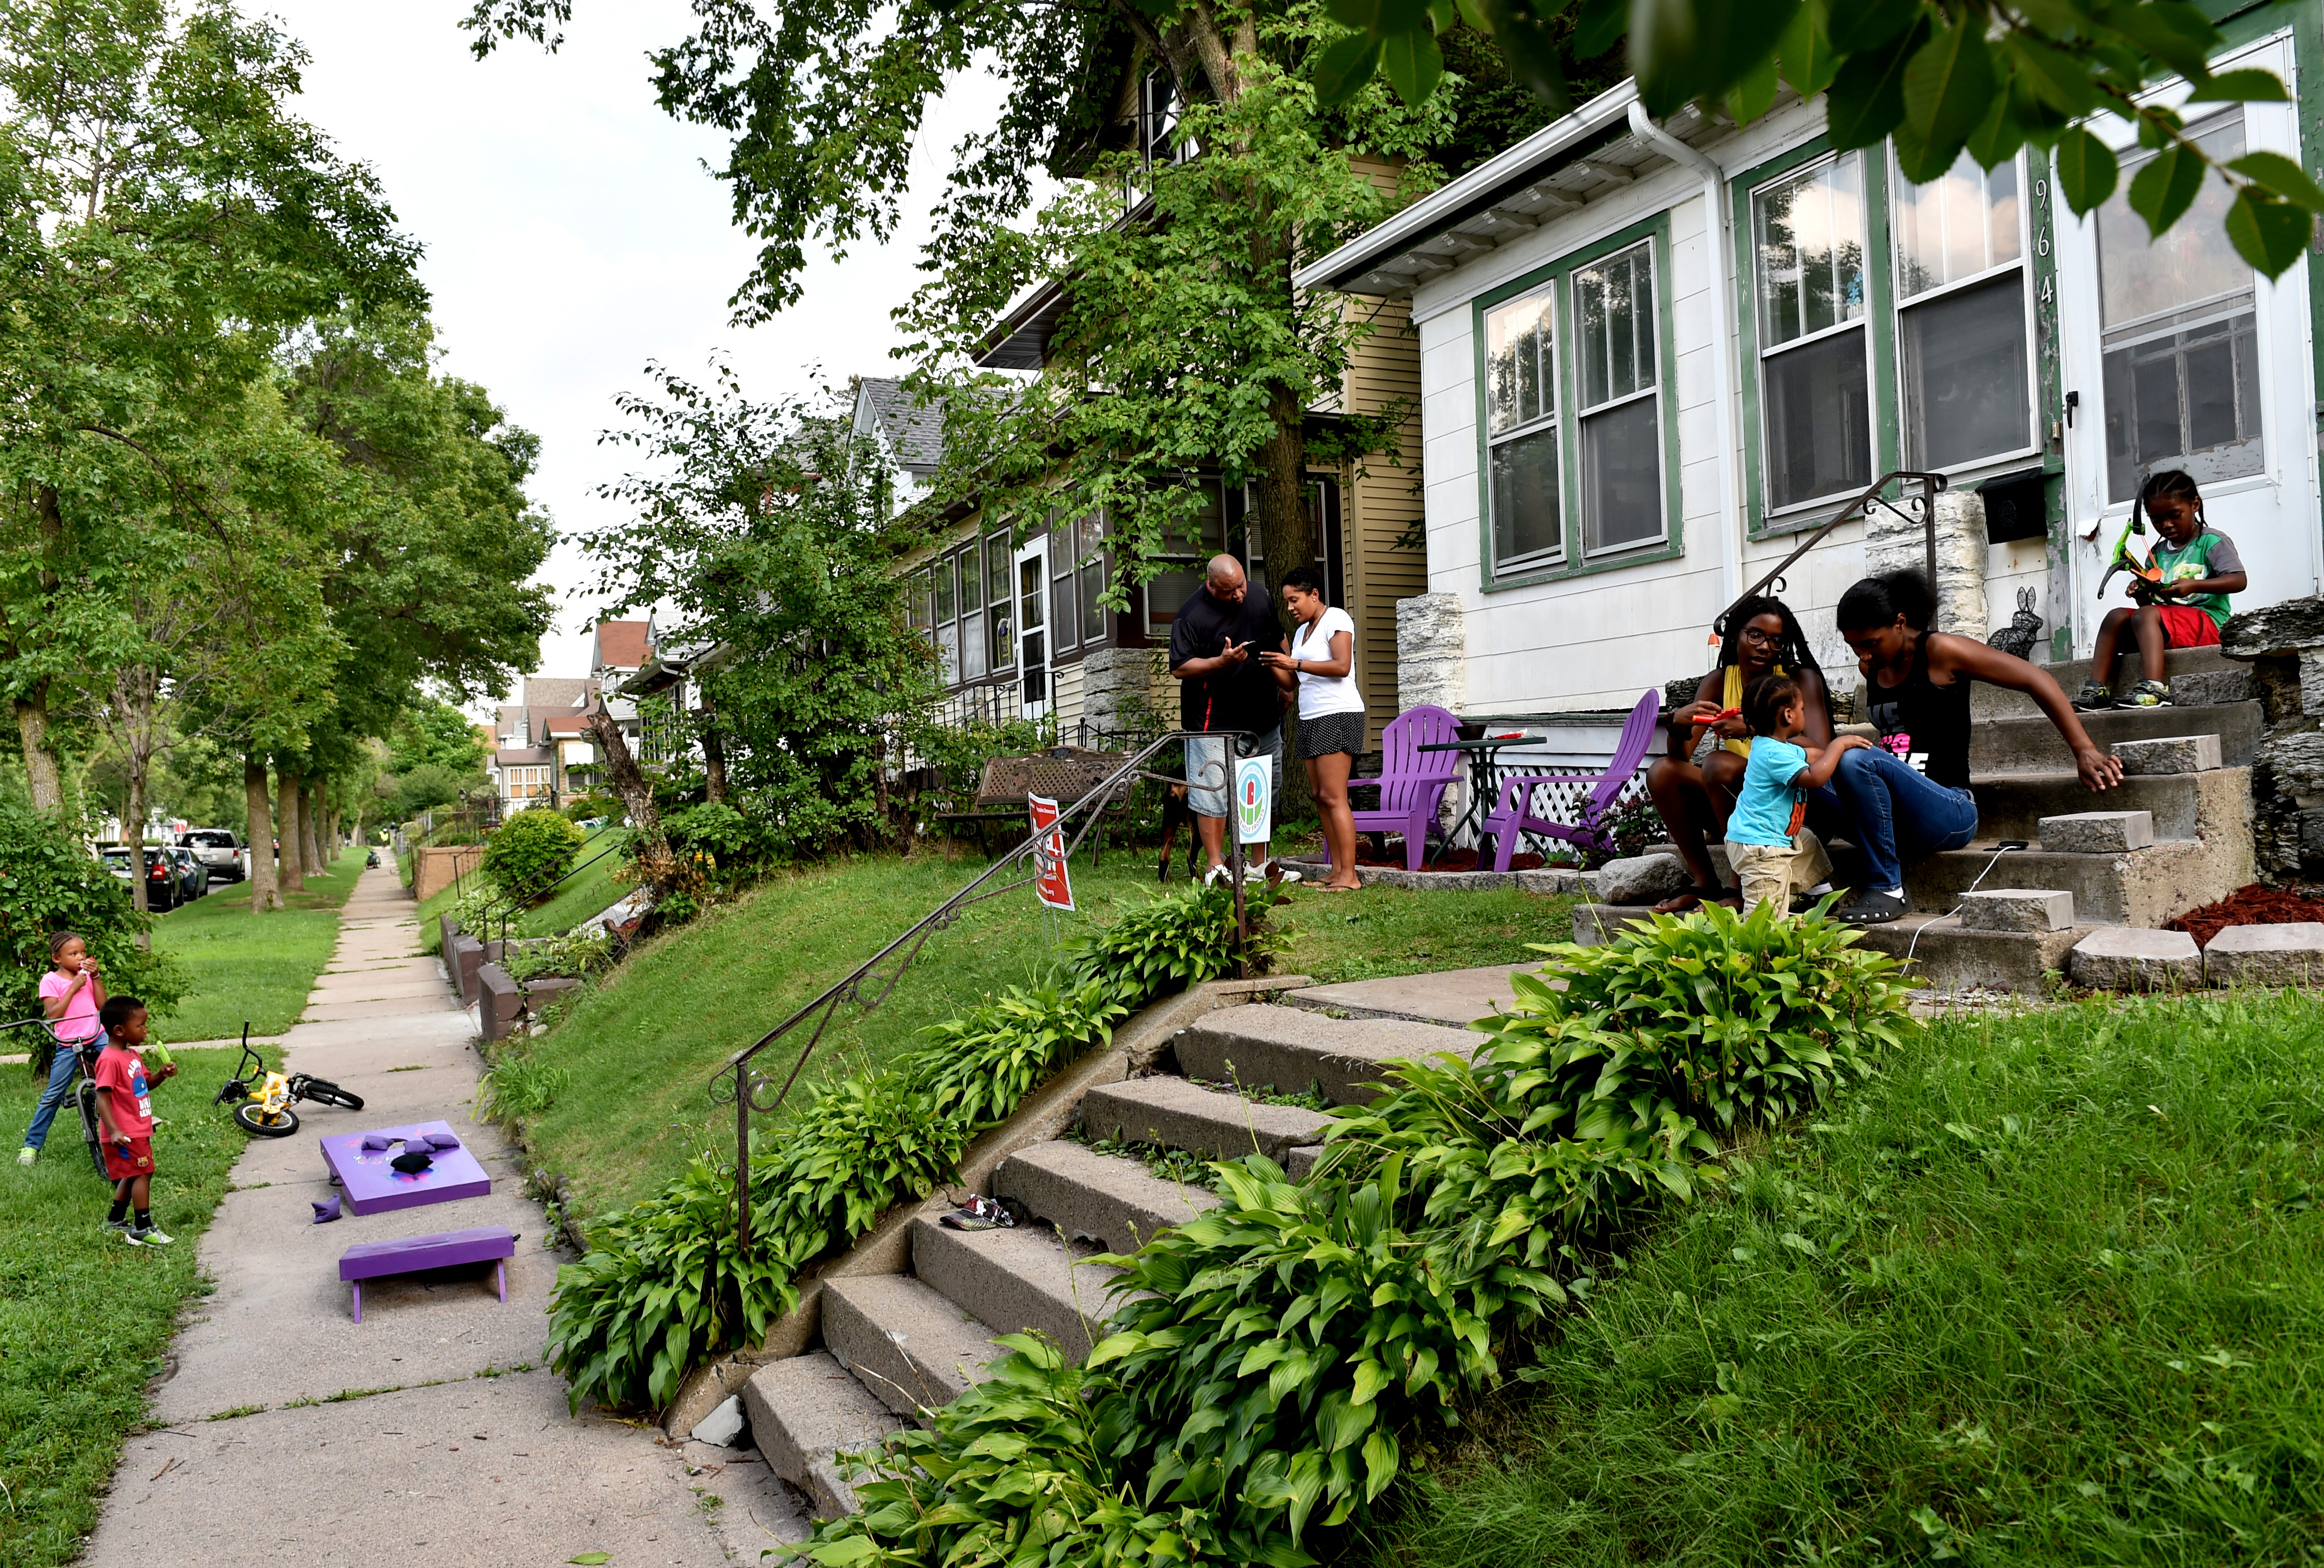 Moving from back yards to front, St. Paul neighbors get acquainted